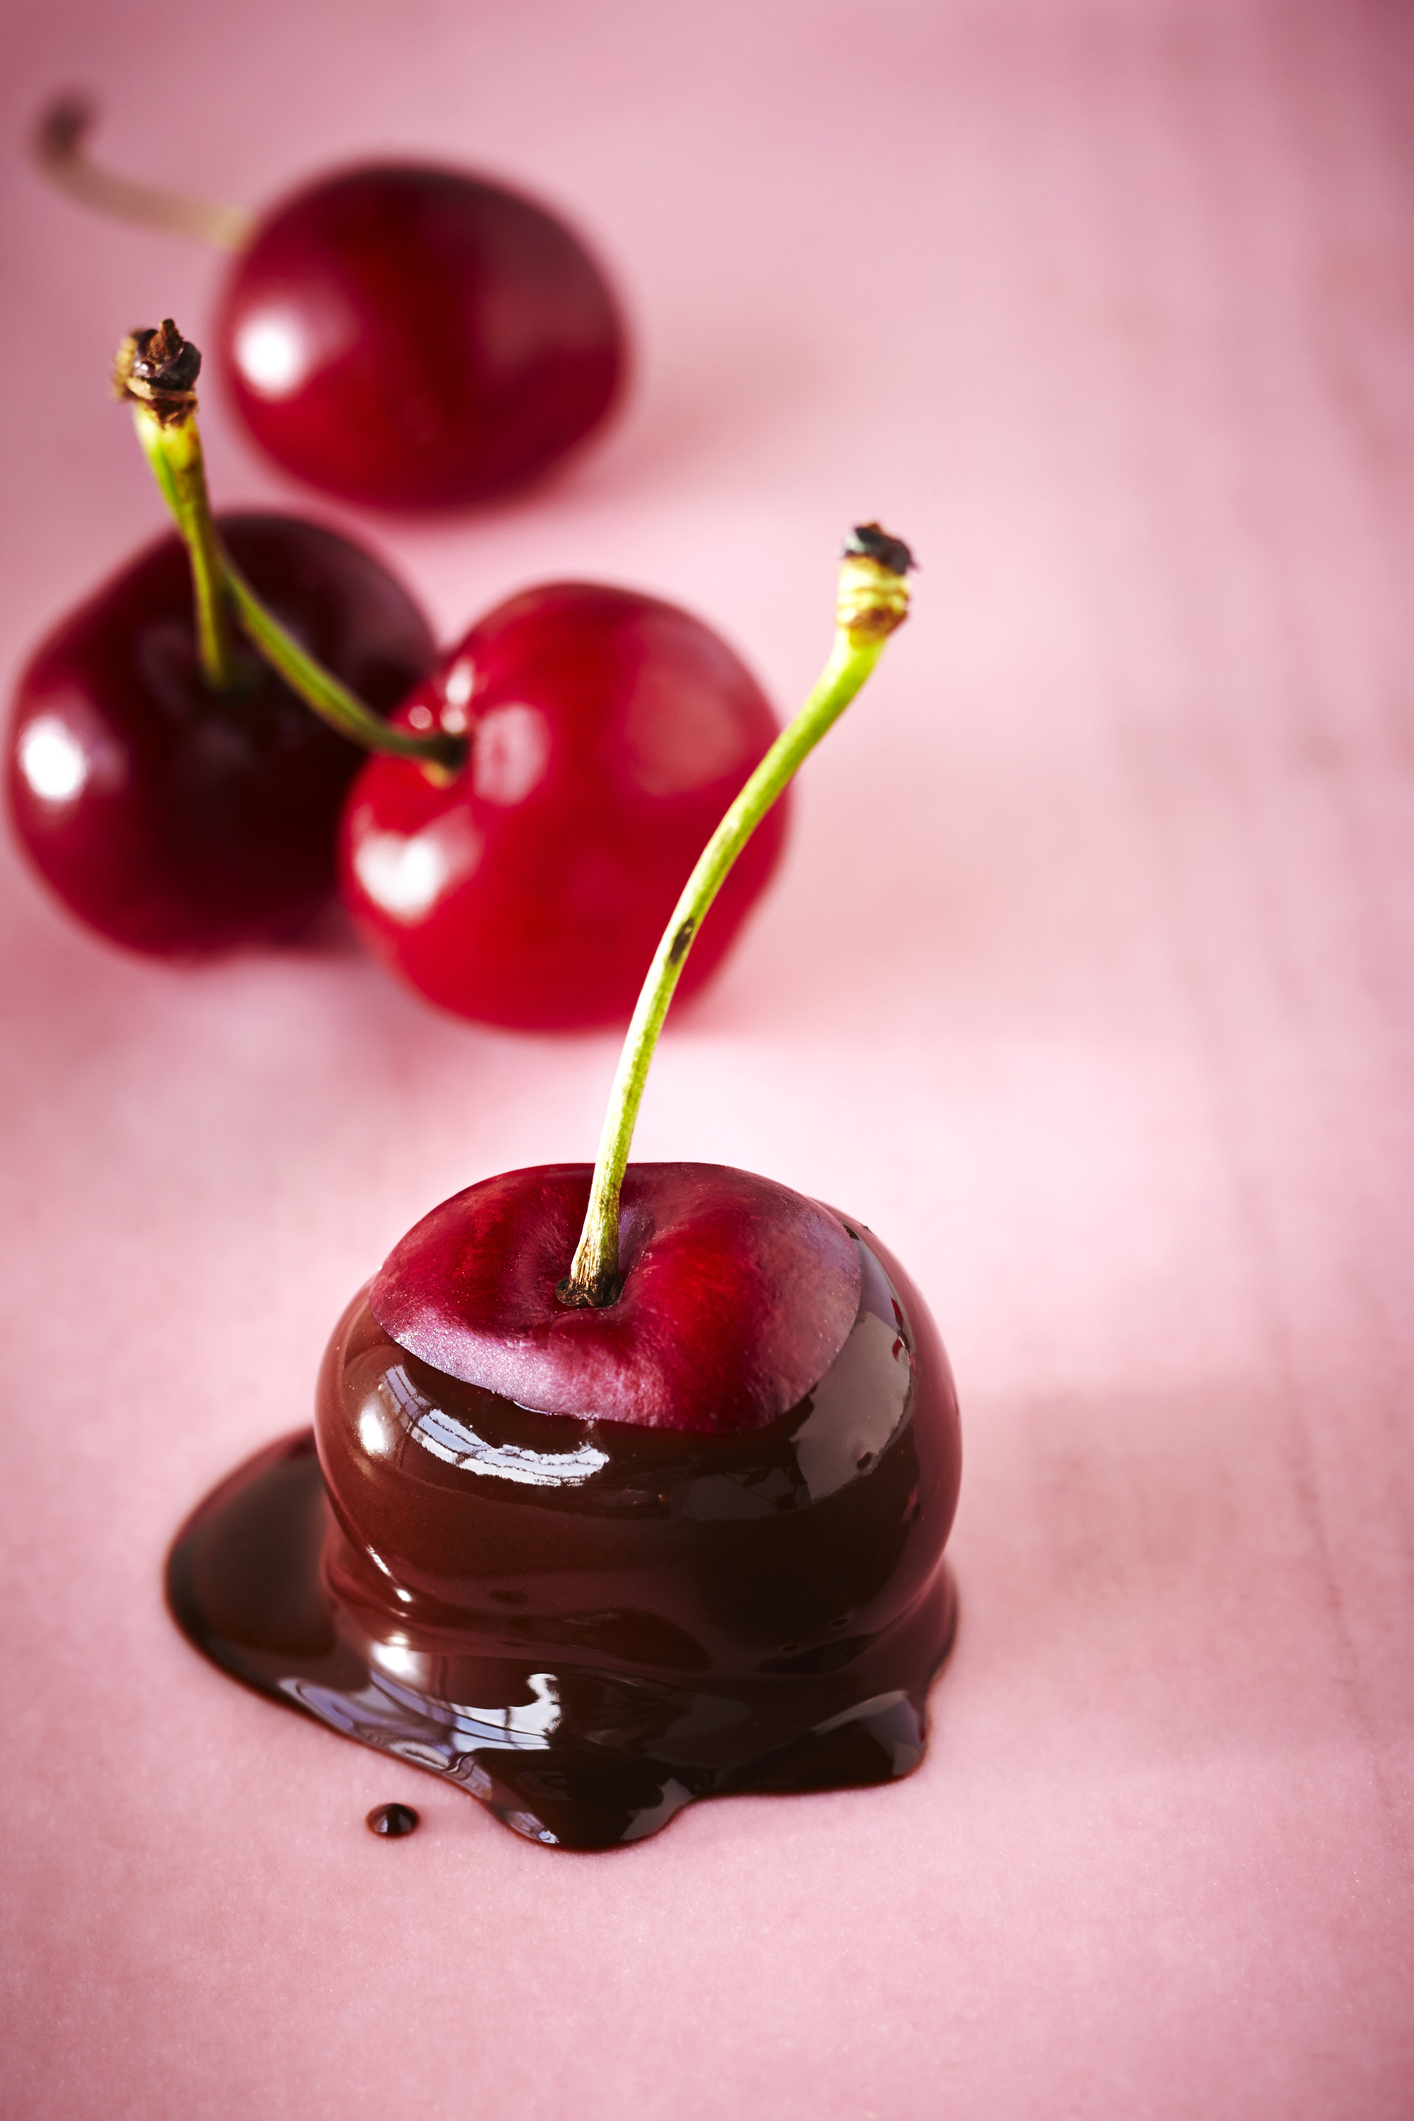 Close-up of Cherry Dipped in Chocolate on Pink Background with un-dipped Cherries in the Background, Studio Shot